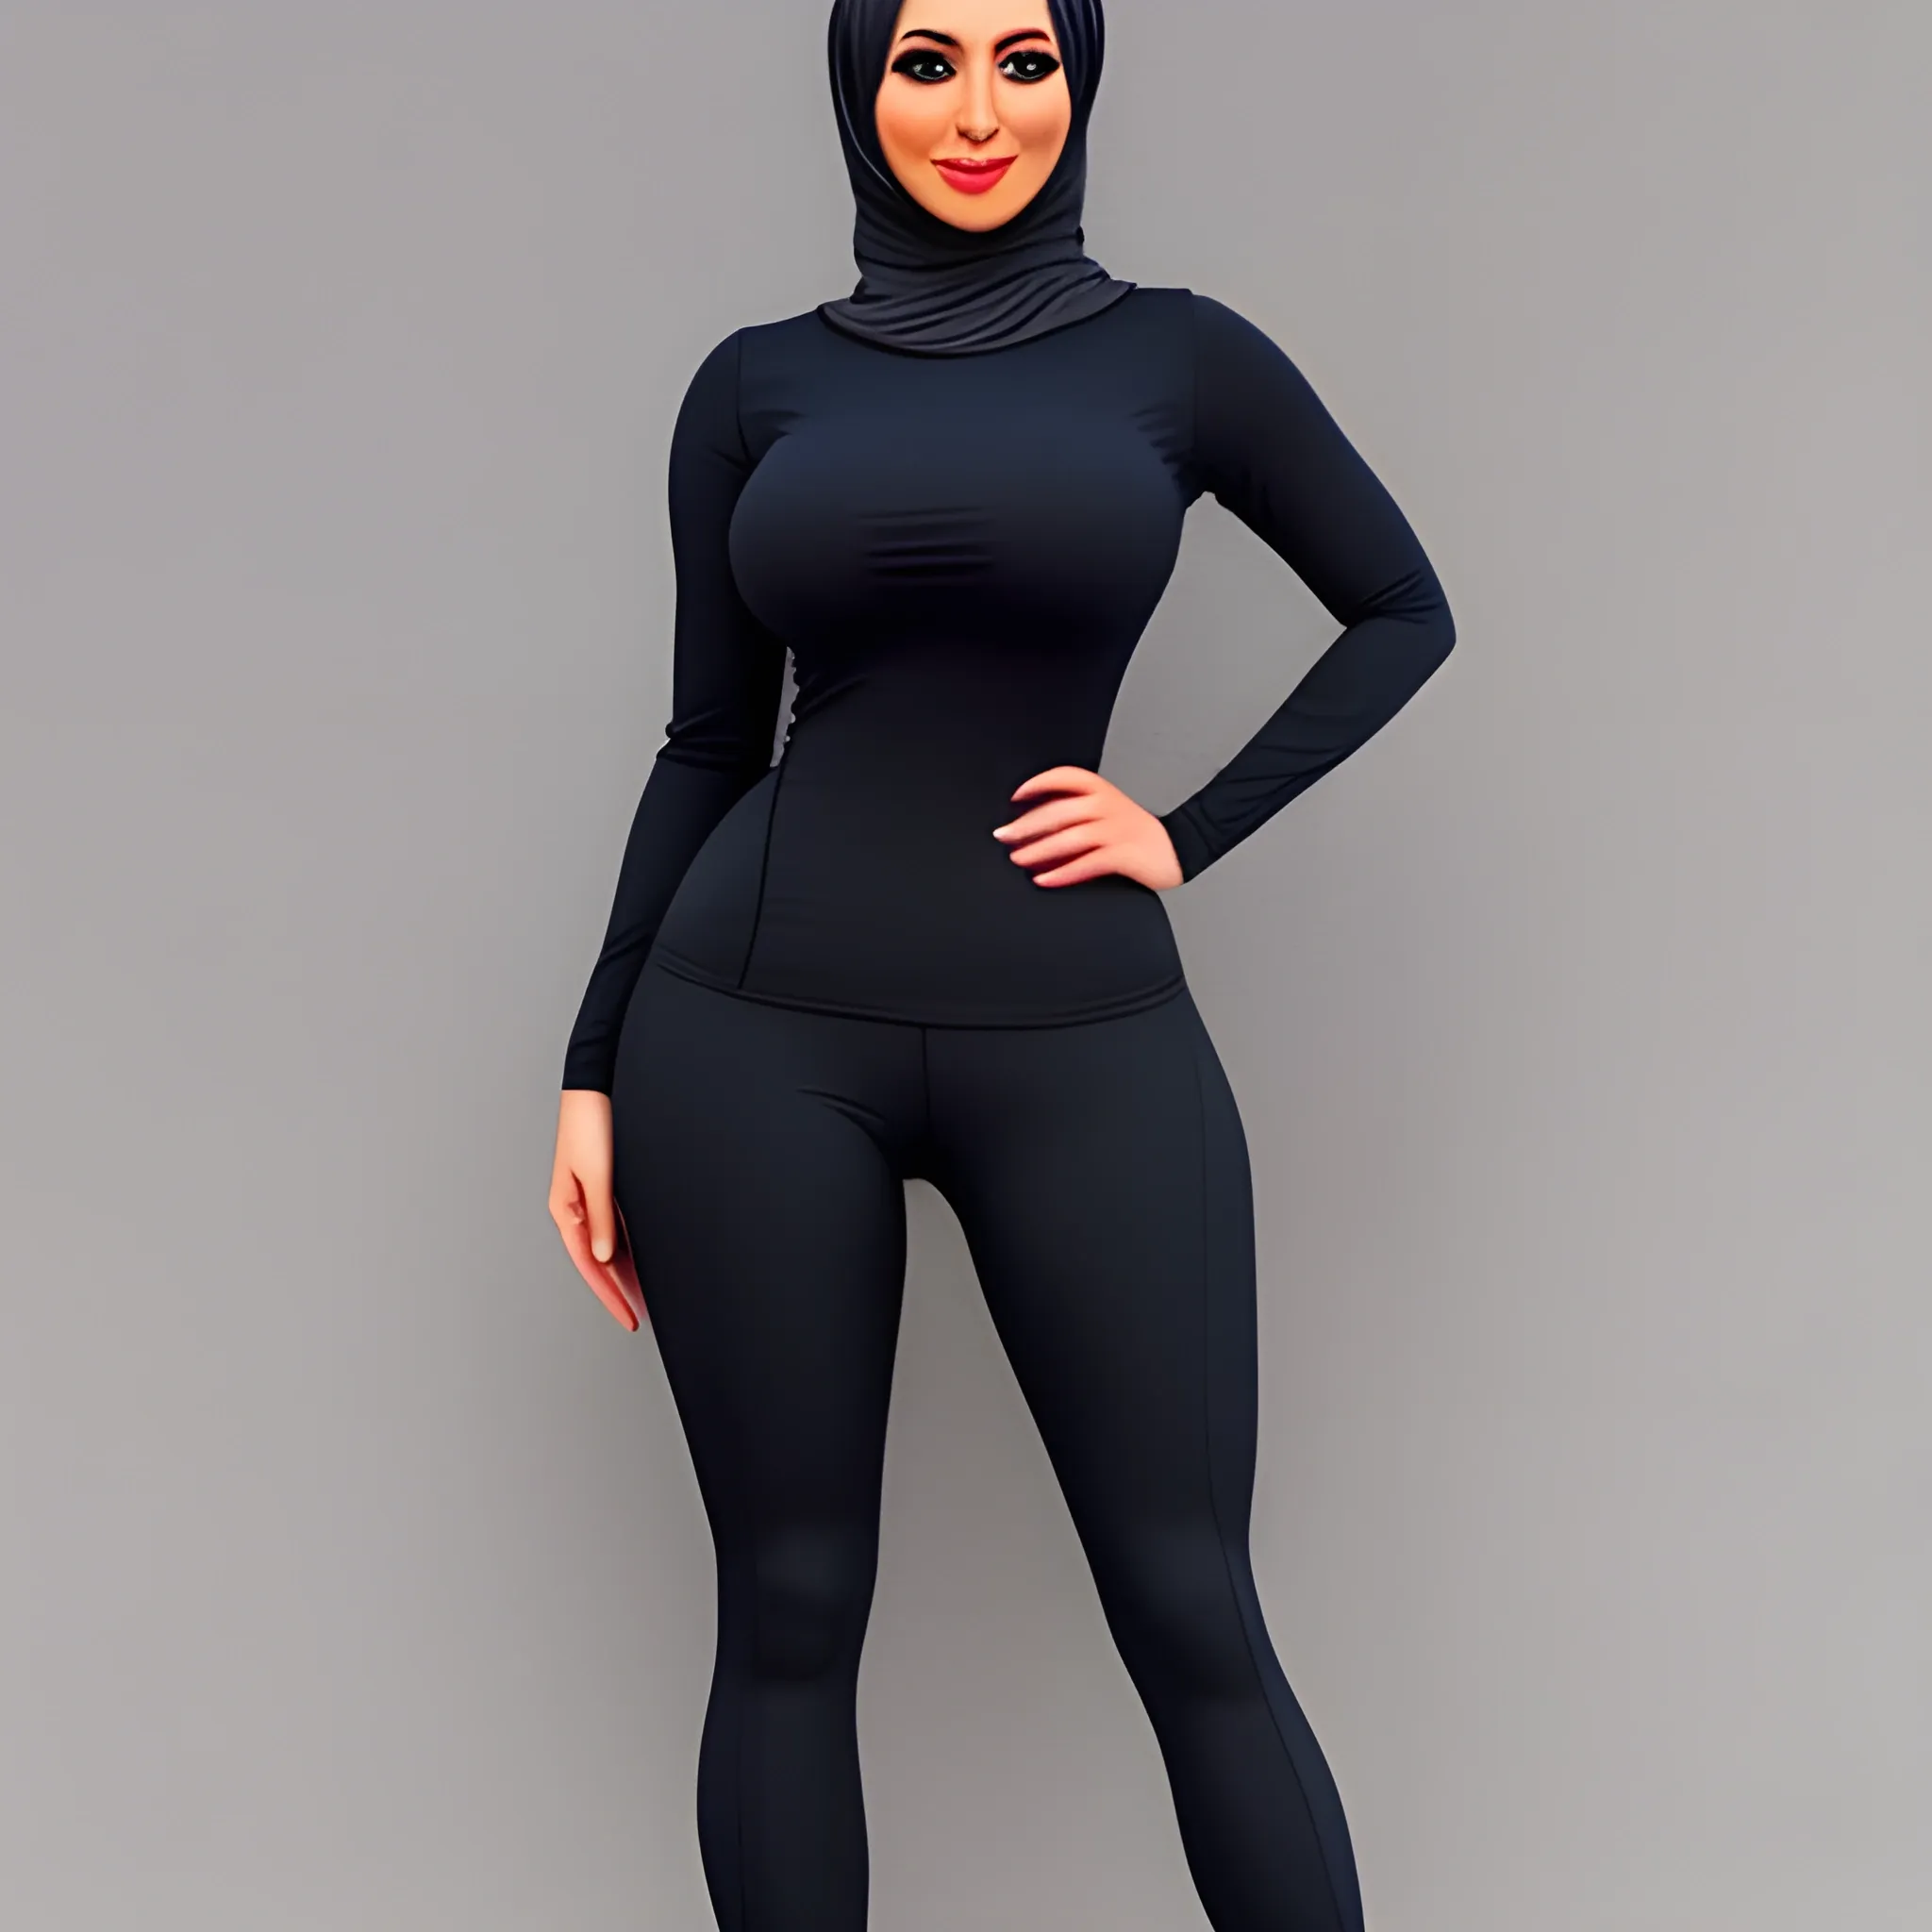 make a hijab girl that wears very tight clothes and shows her le 